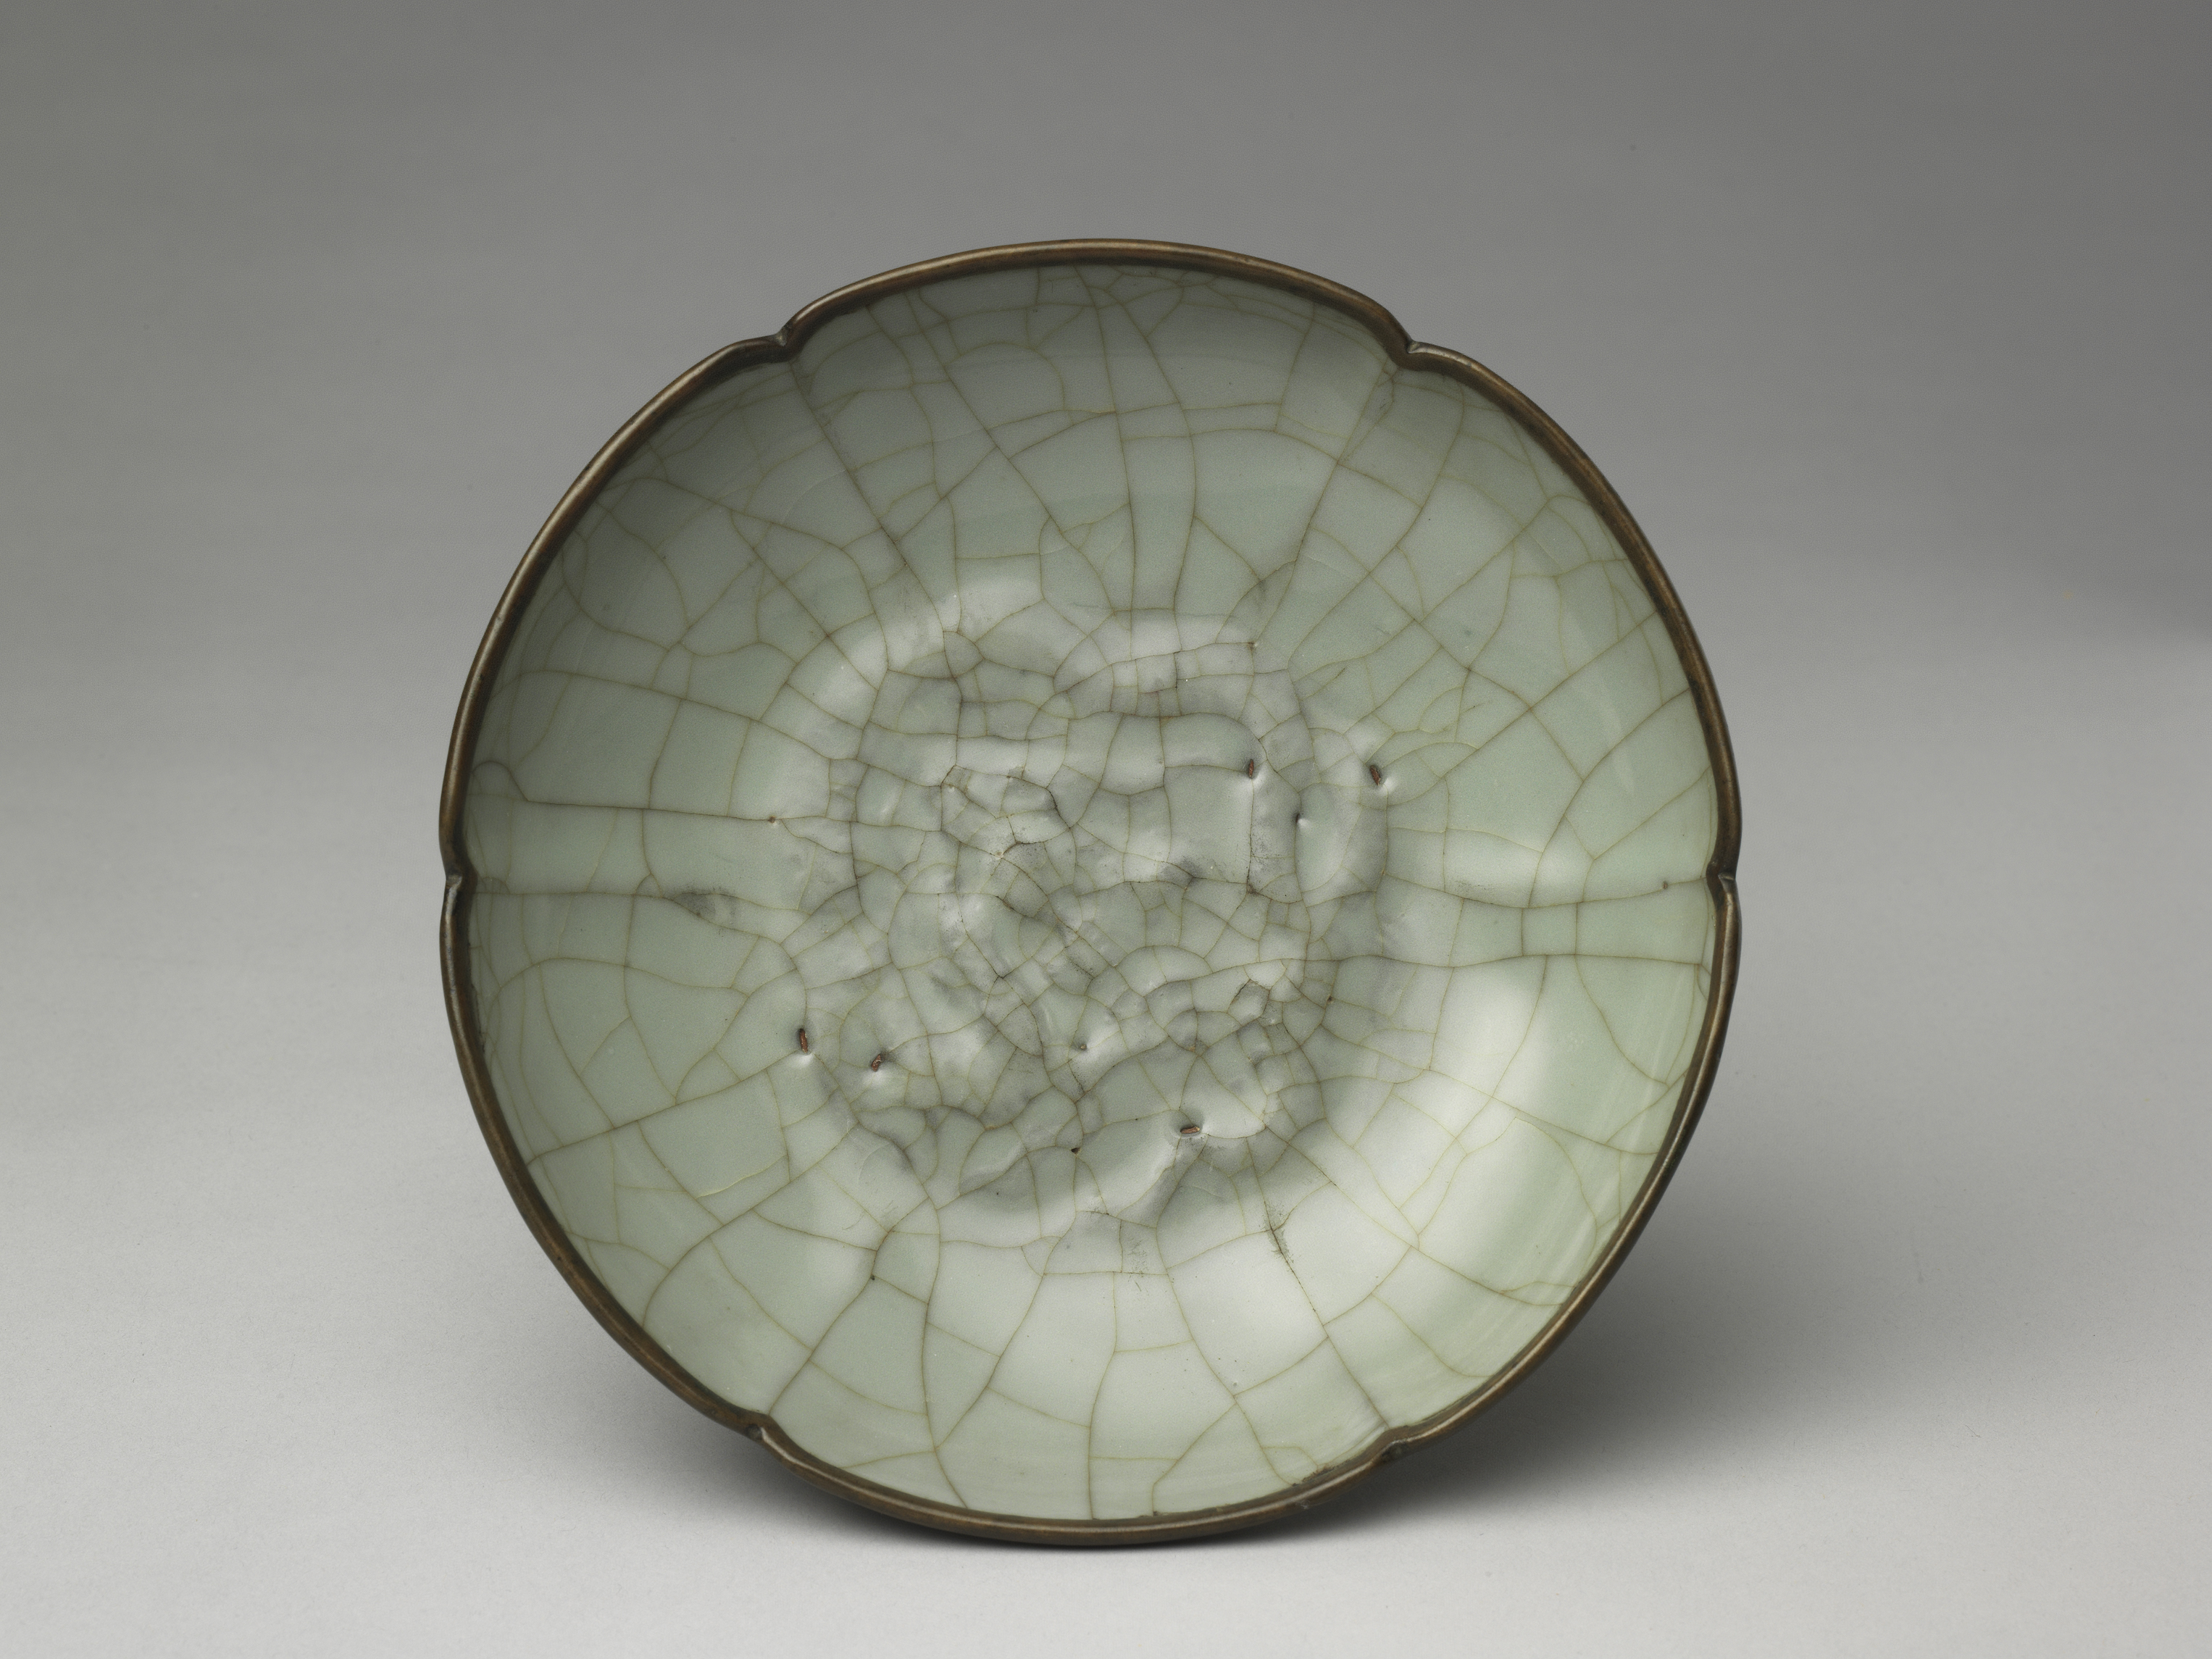 Dish with dragon design in celadon glaze
Guan ware, Southern Song dynasty, 12th-13th century
